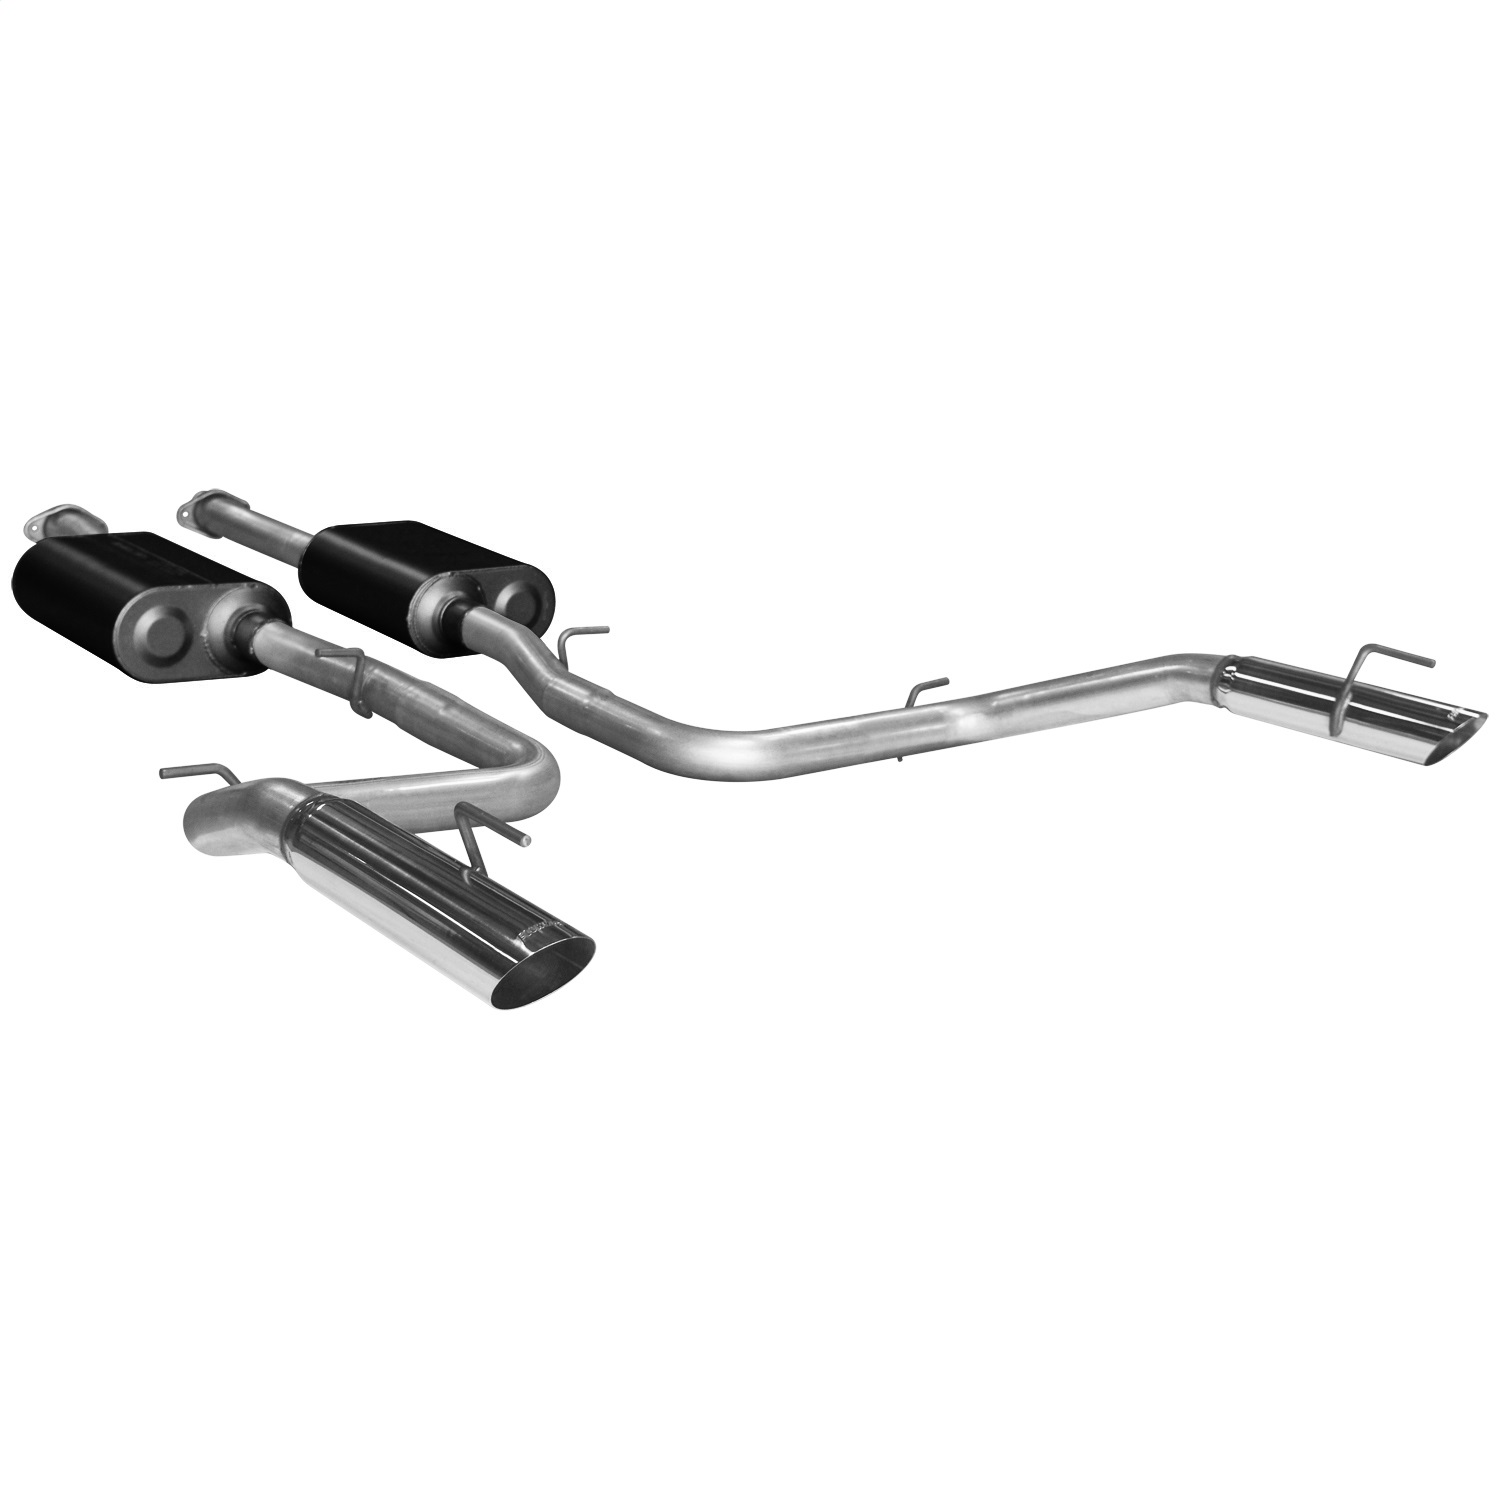 Flowmaster Flowmaster 17248 American Thunder Cat Back Exhaust System Fits 99-04 Mustang